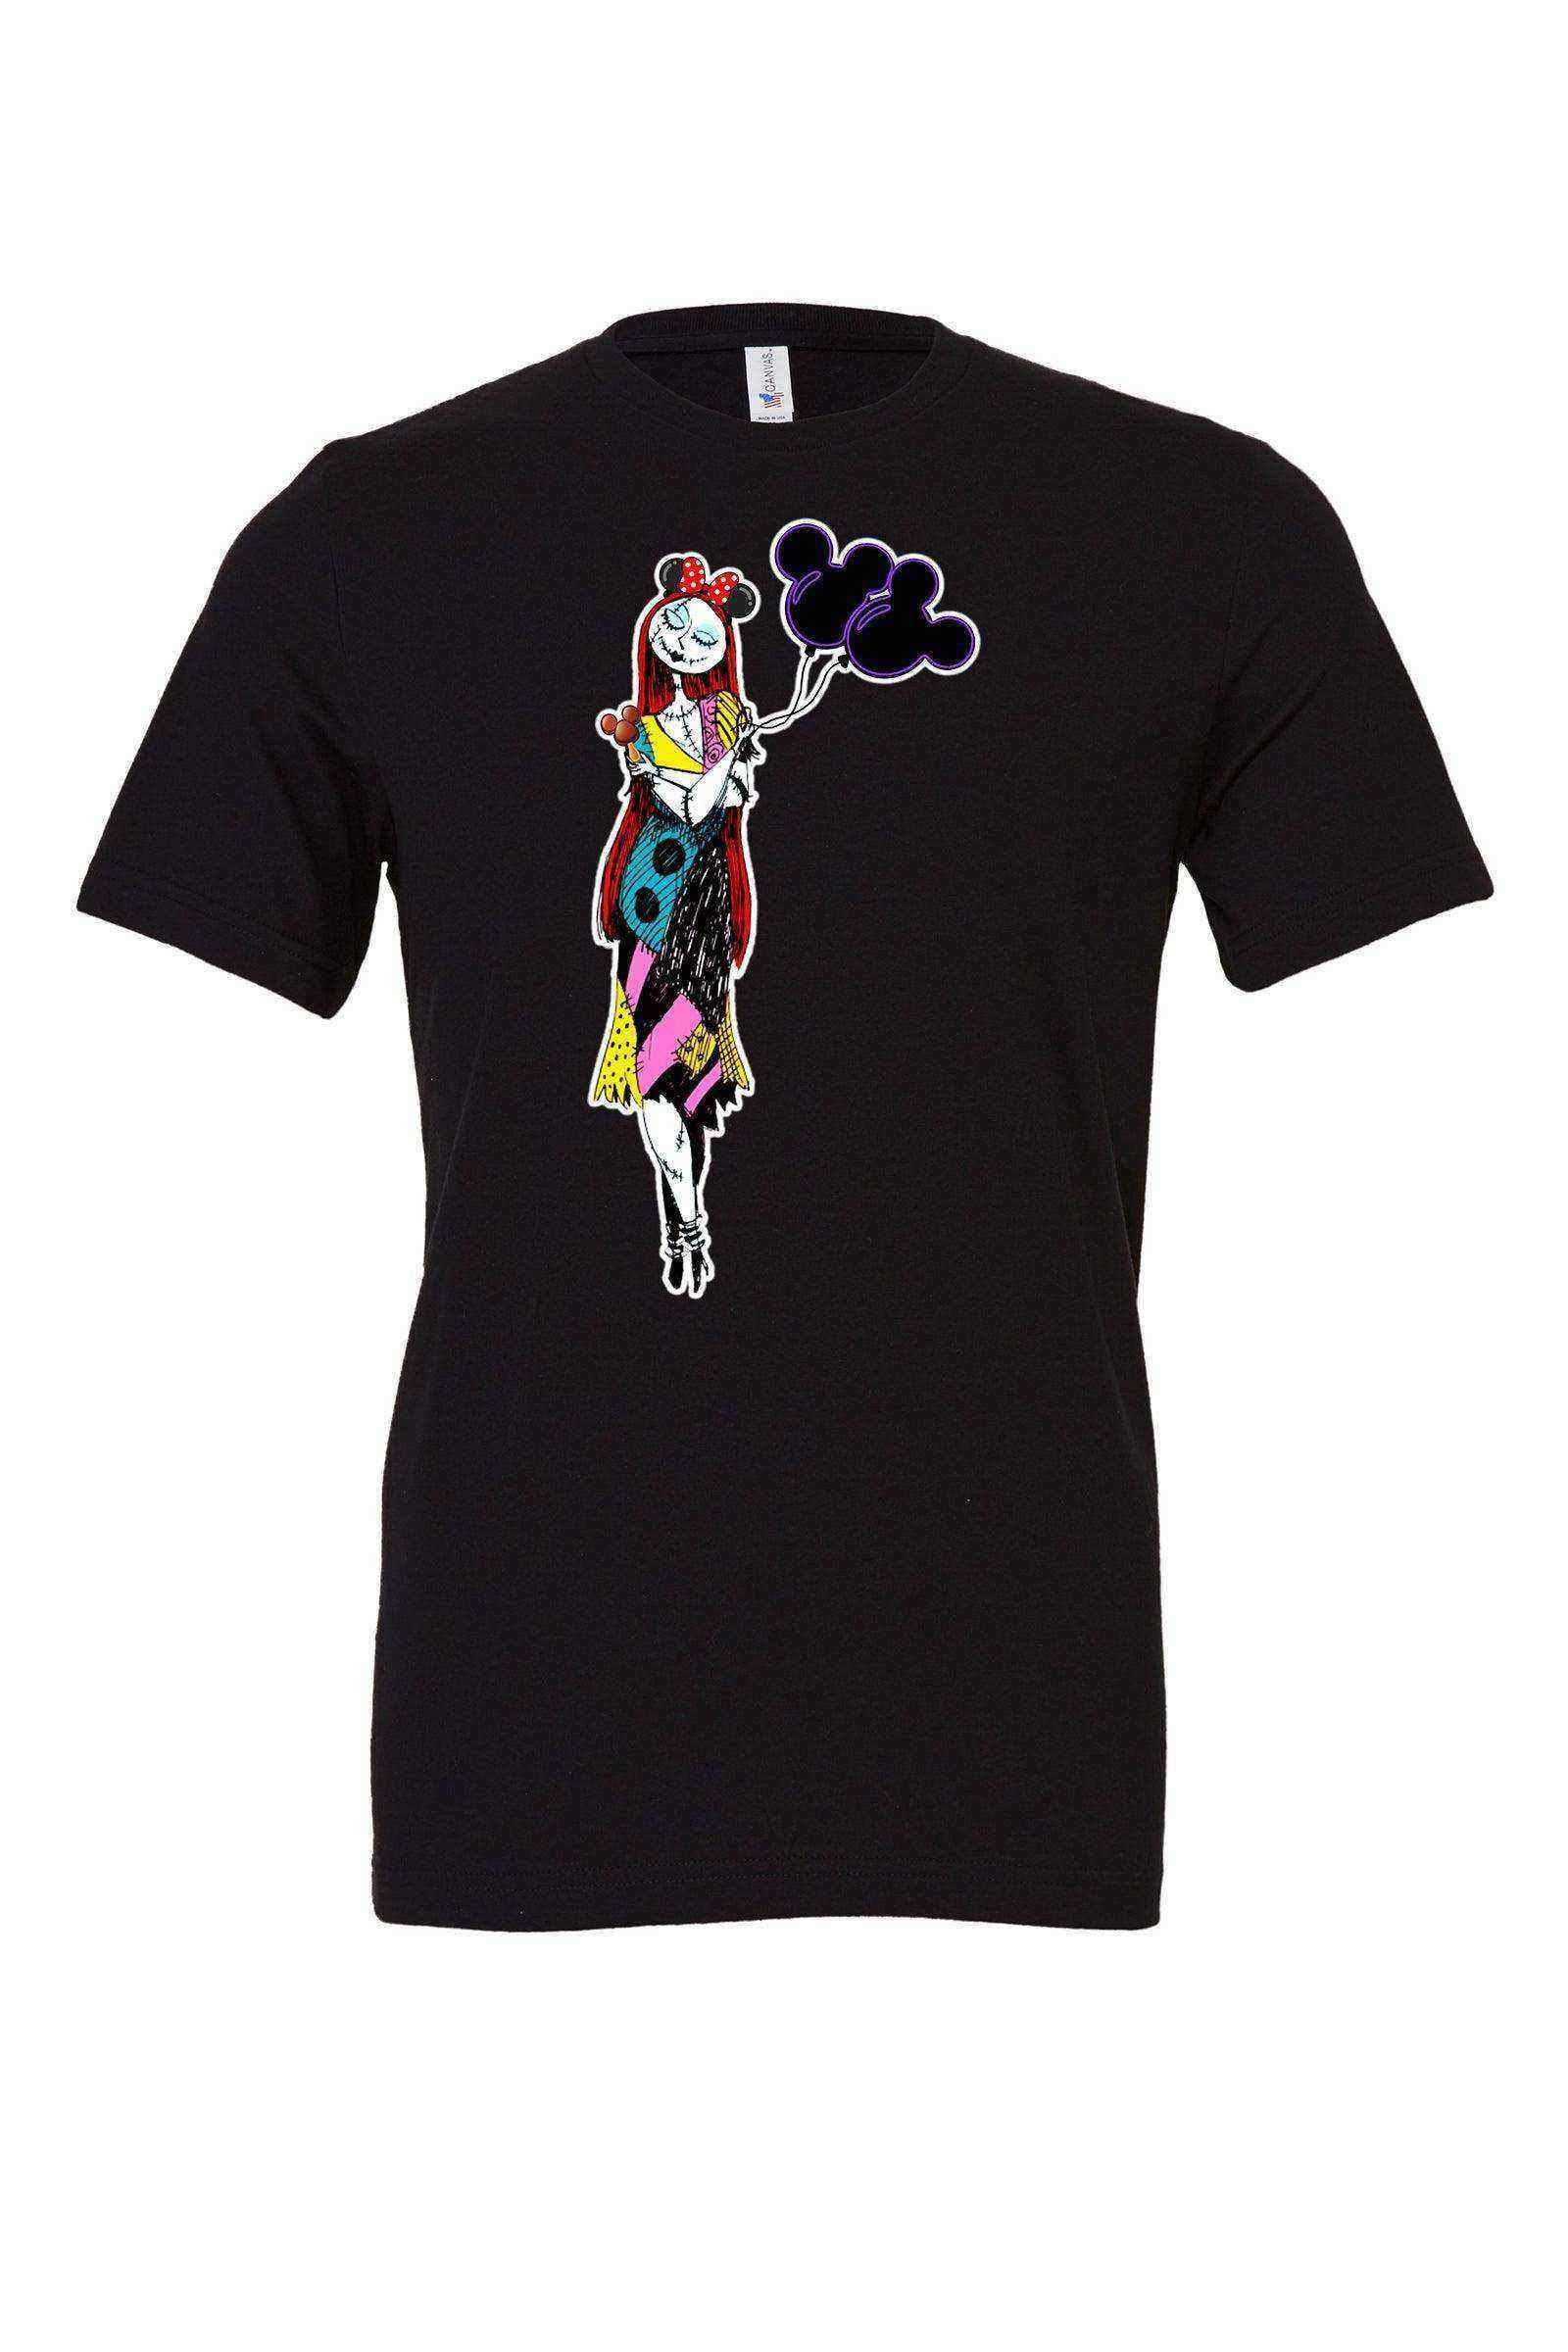 Youth | Park Hopping Sally Shirt | Nightmare Before Christmas - Dylan's Tees